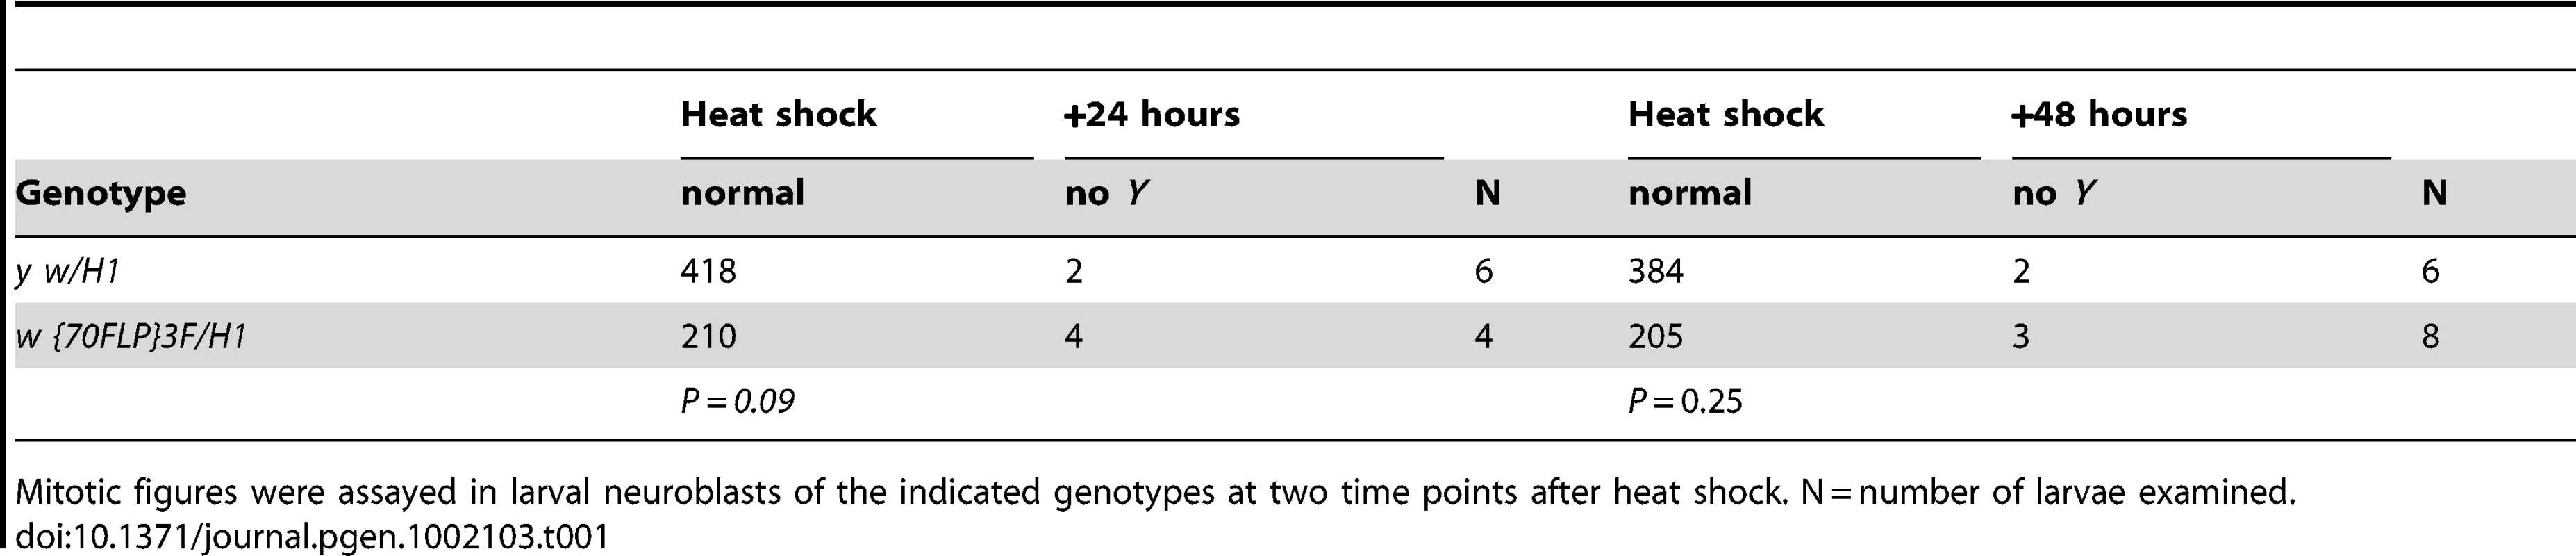 Assay for <i>Y</i> chromosome loss after dicentric induction.